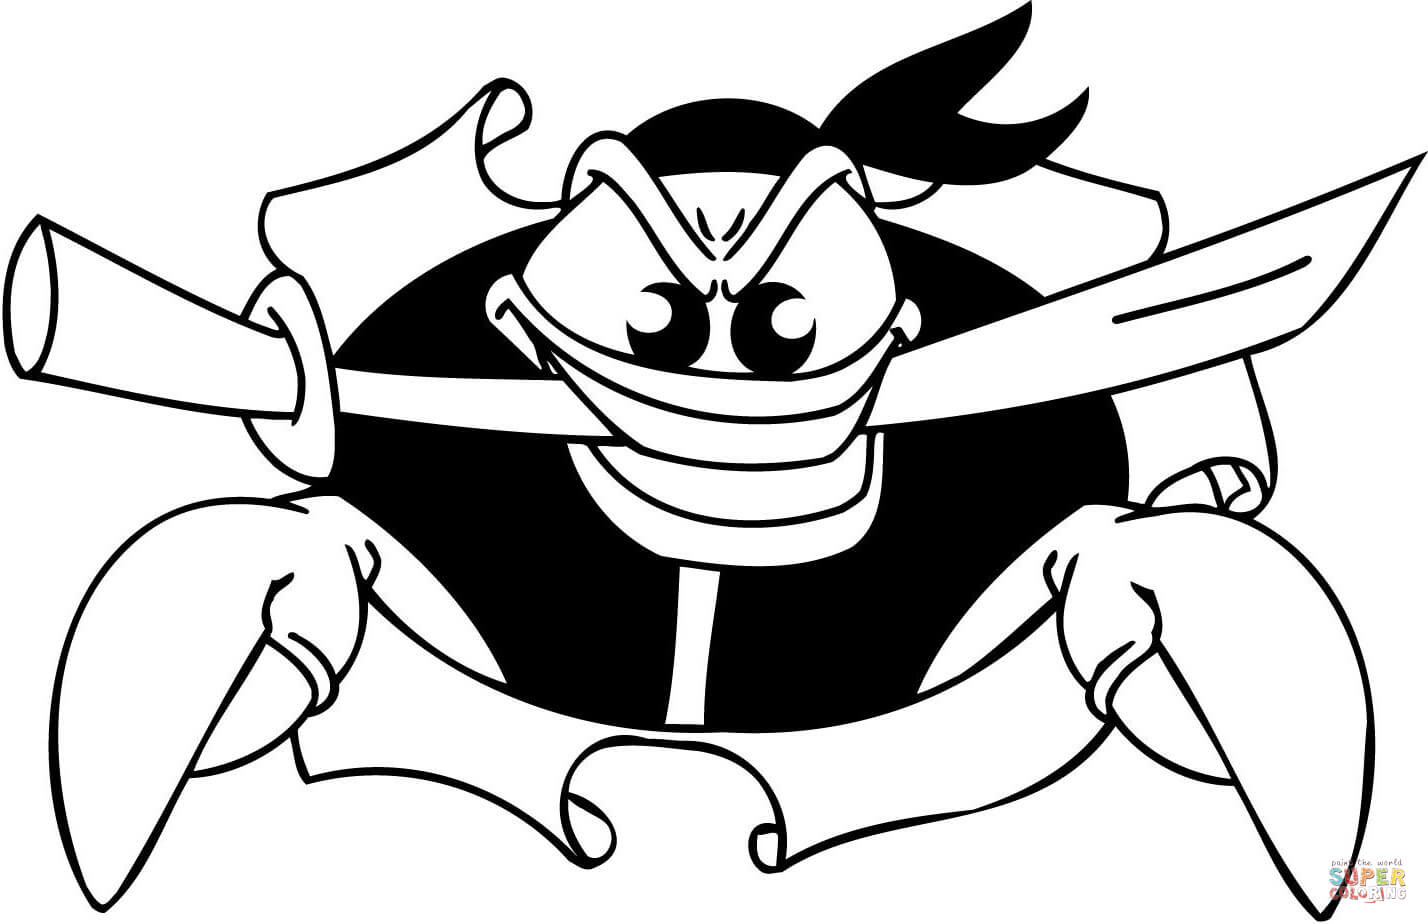 Simple Jolly Roger Coloring Page for Kids